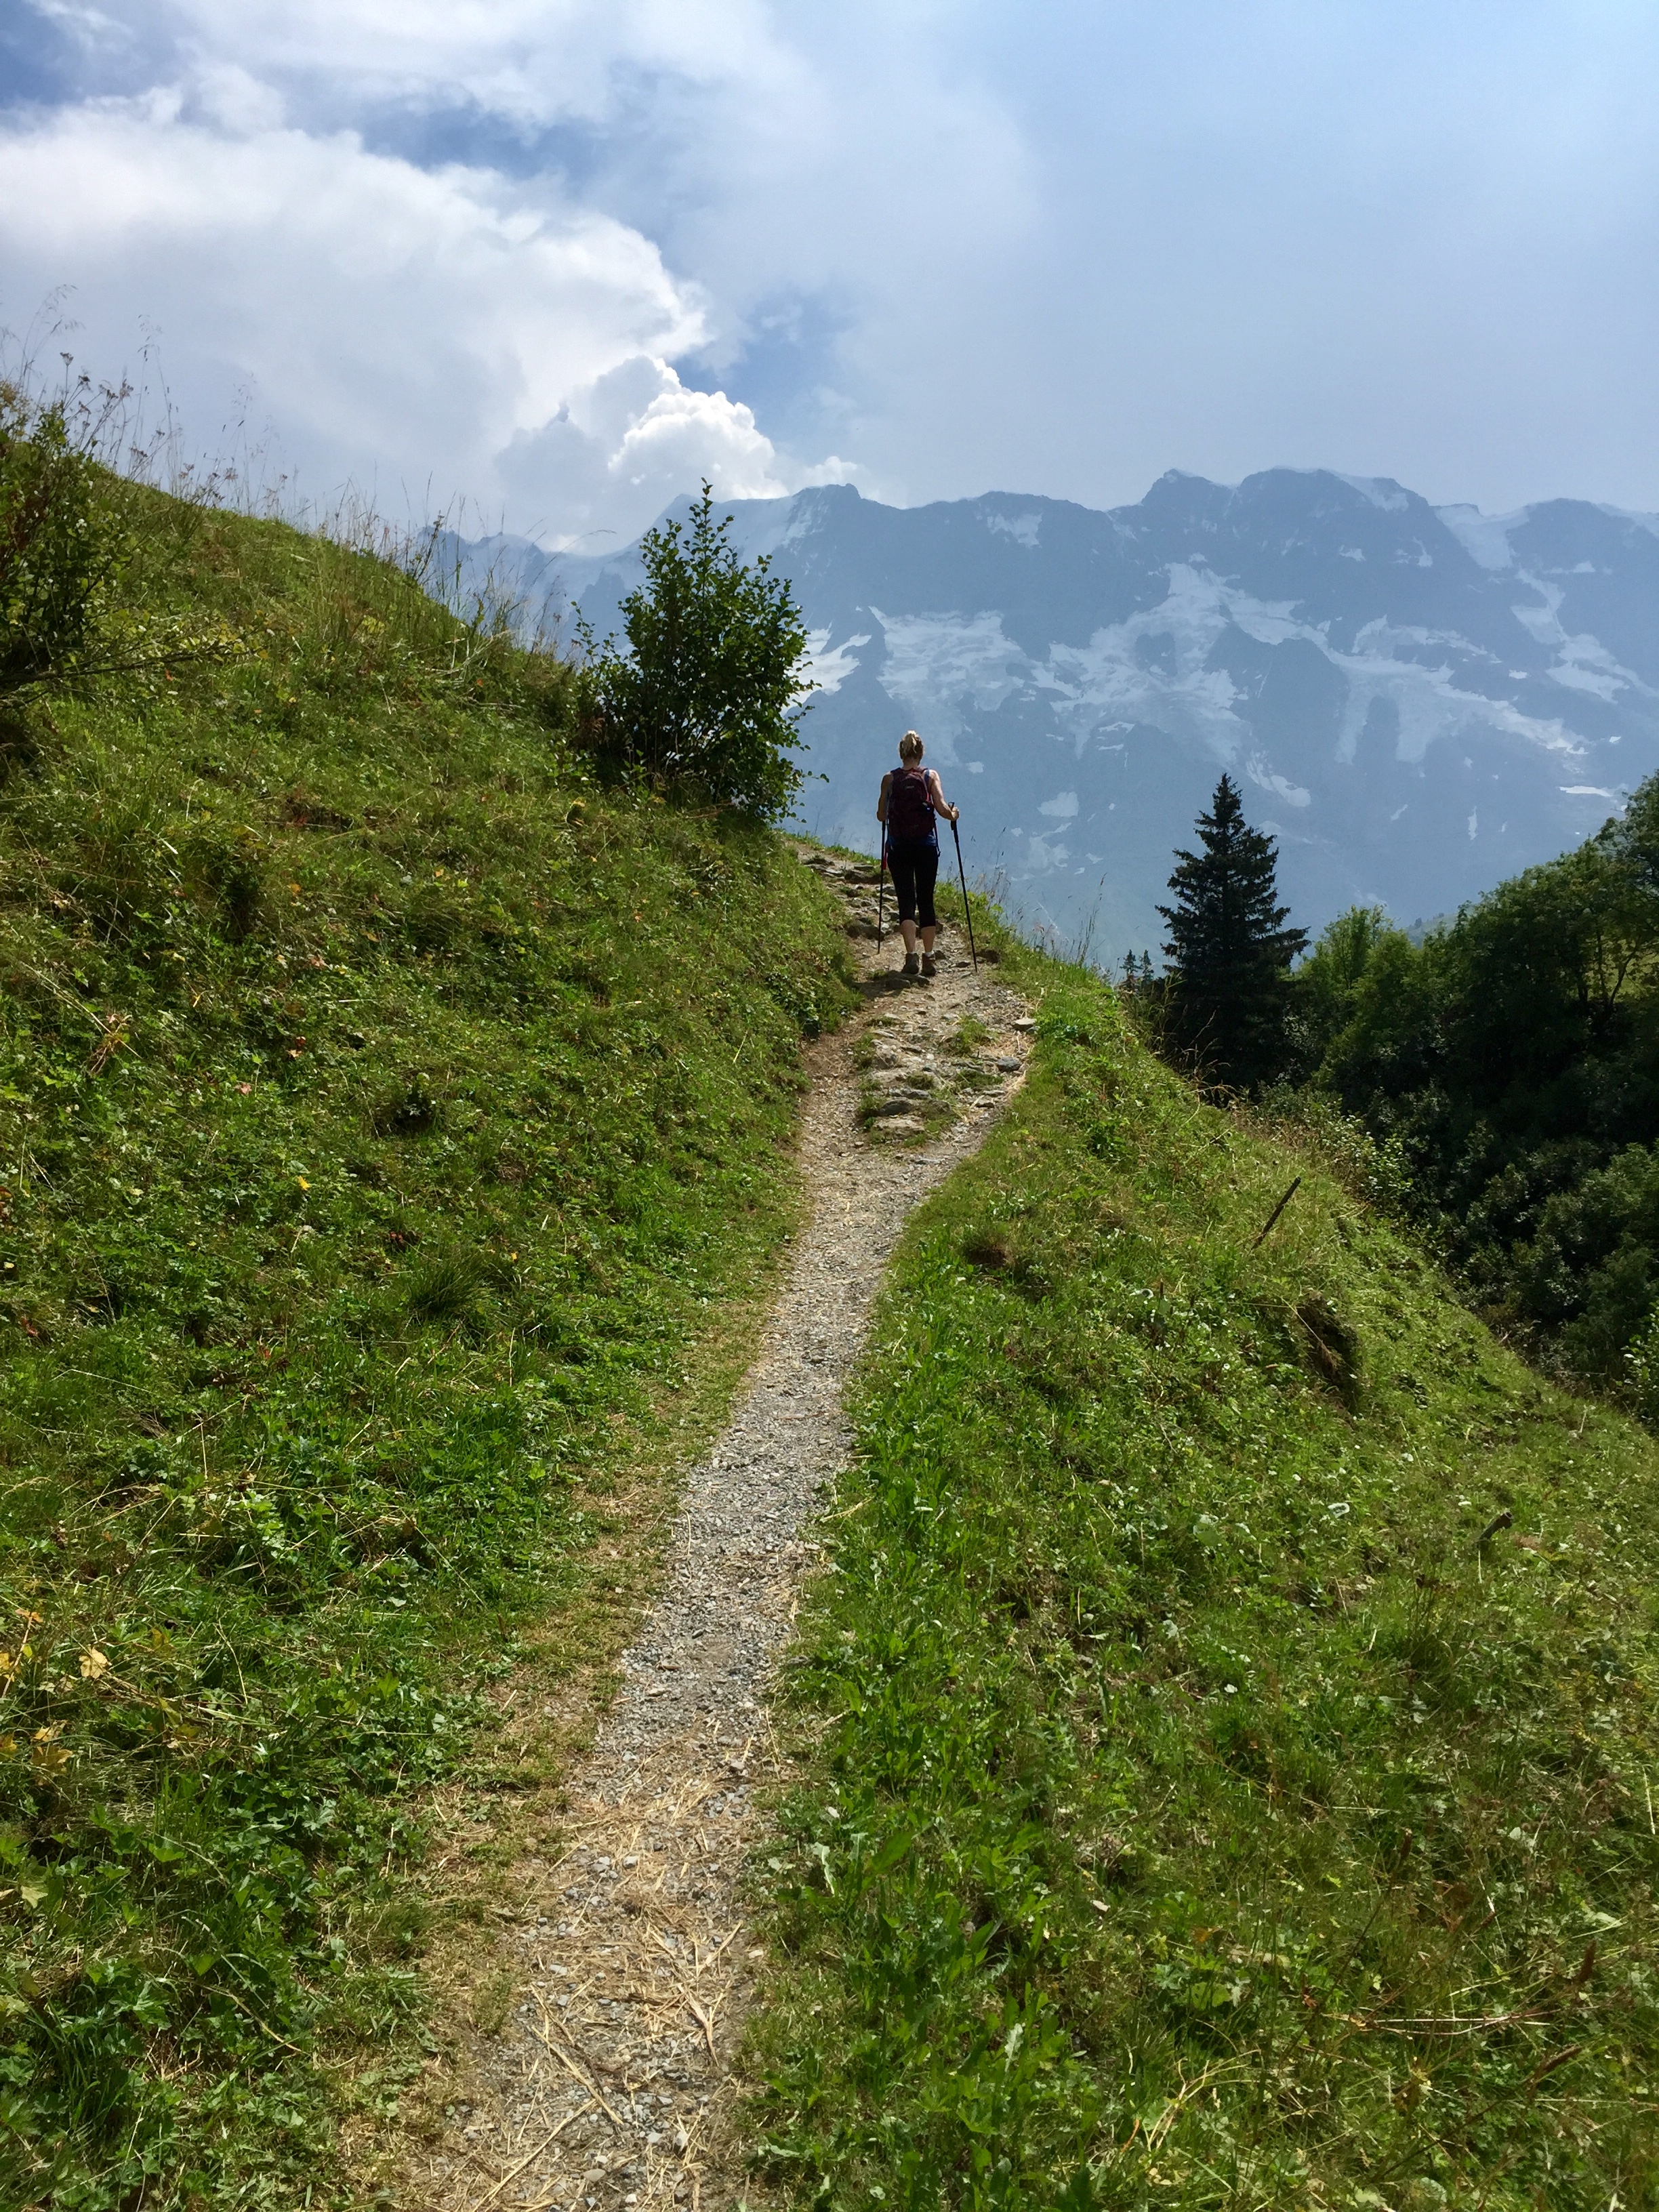 Hiker in a hiking path heading upward and toward Gimmelwald